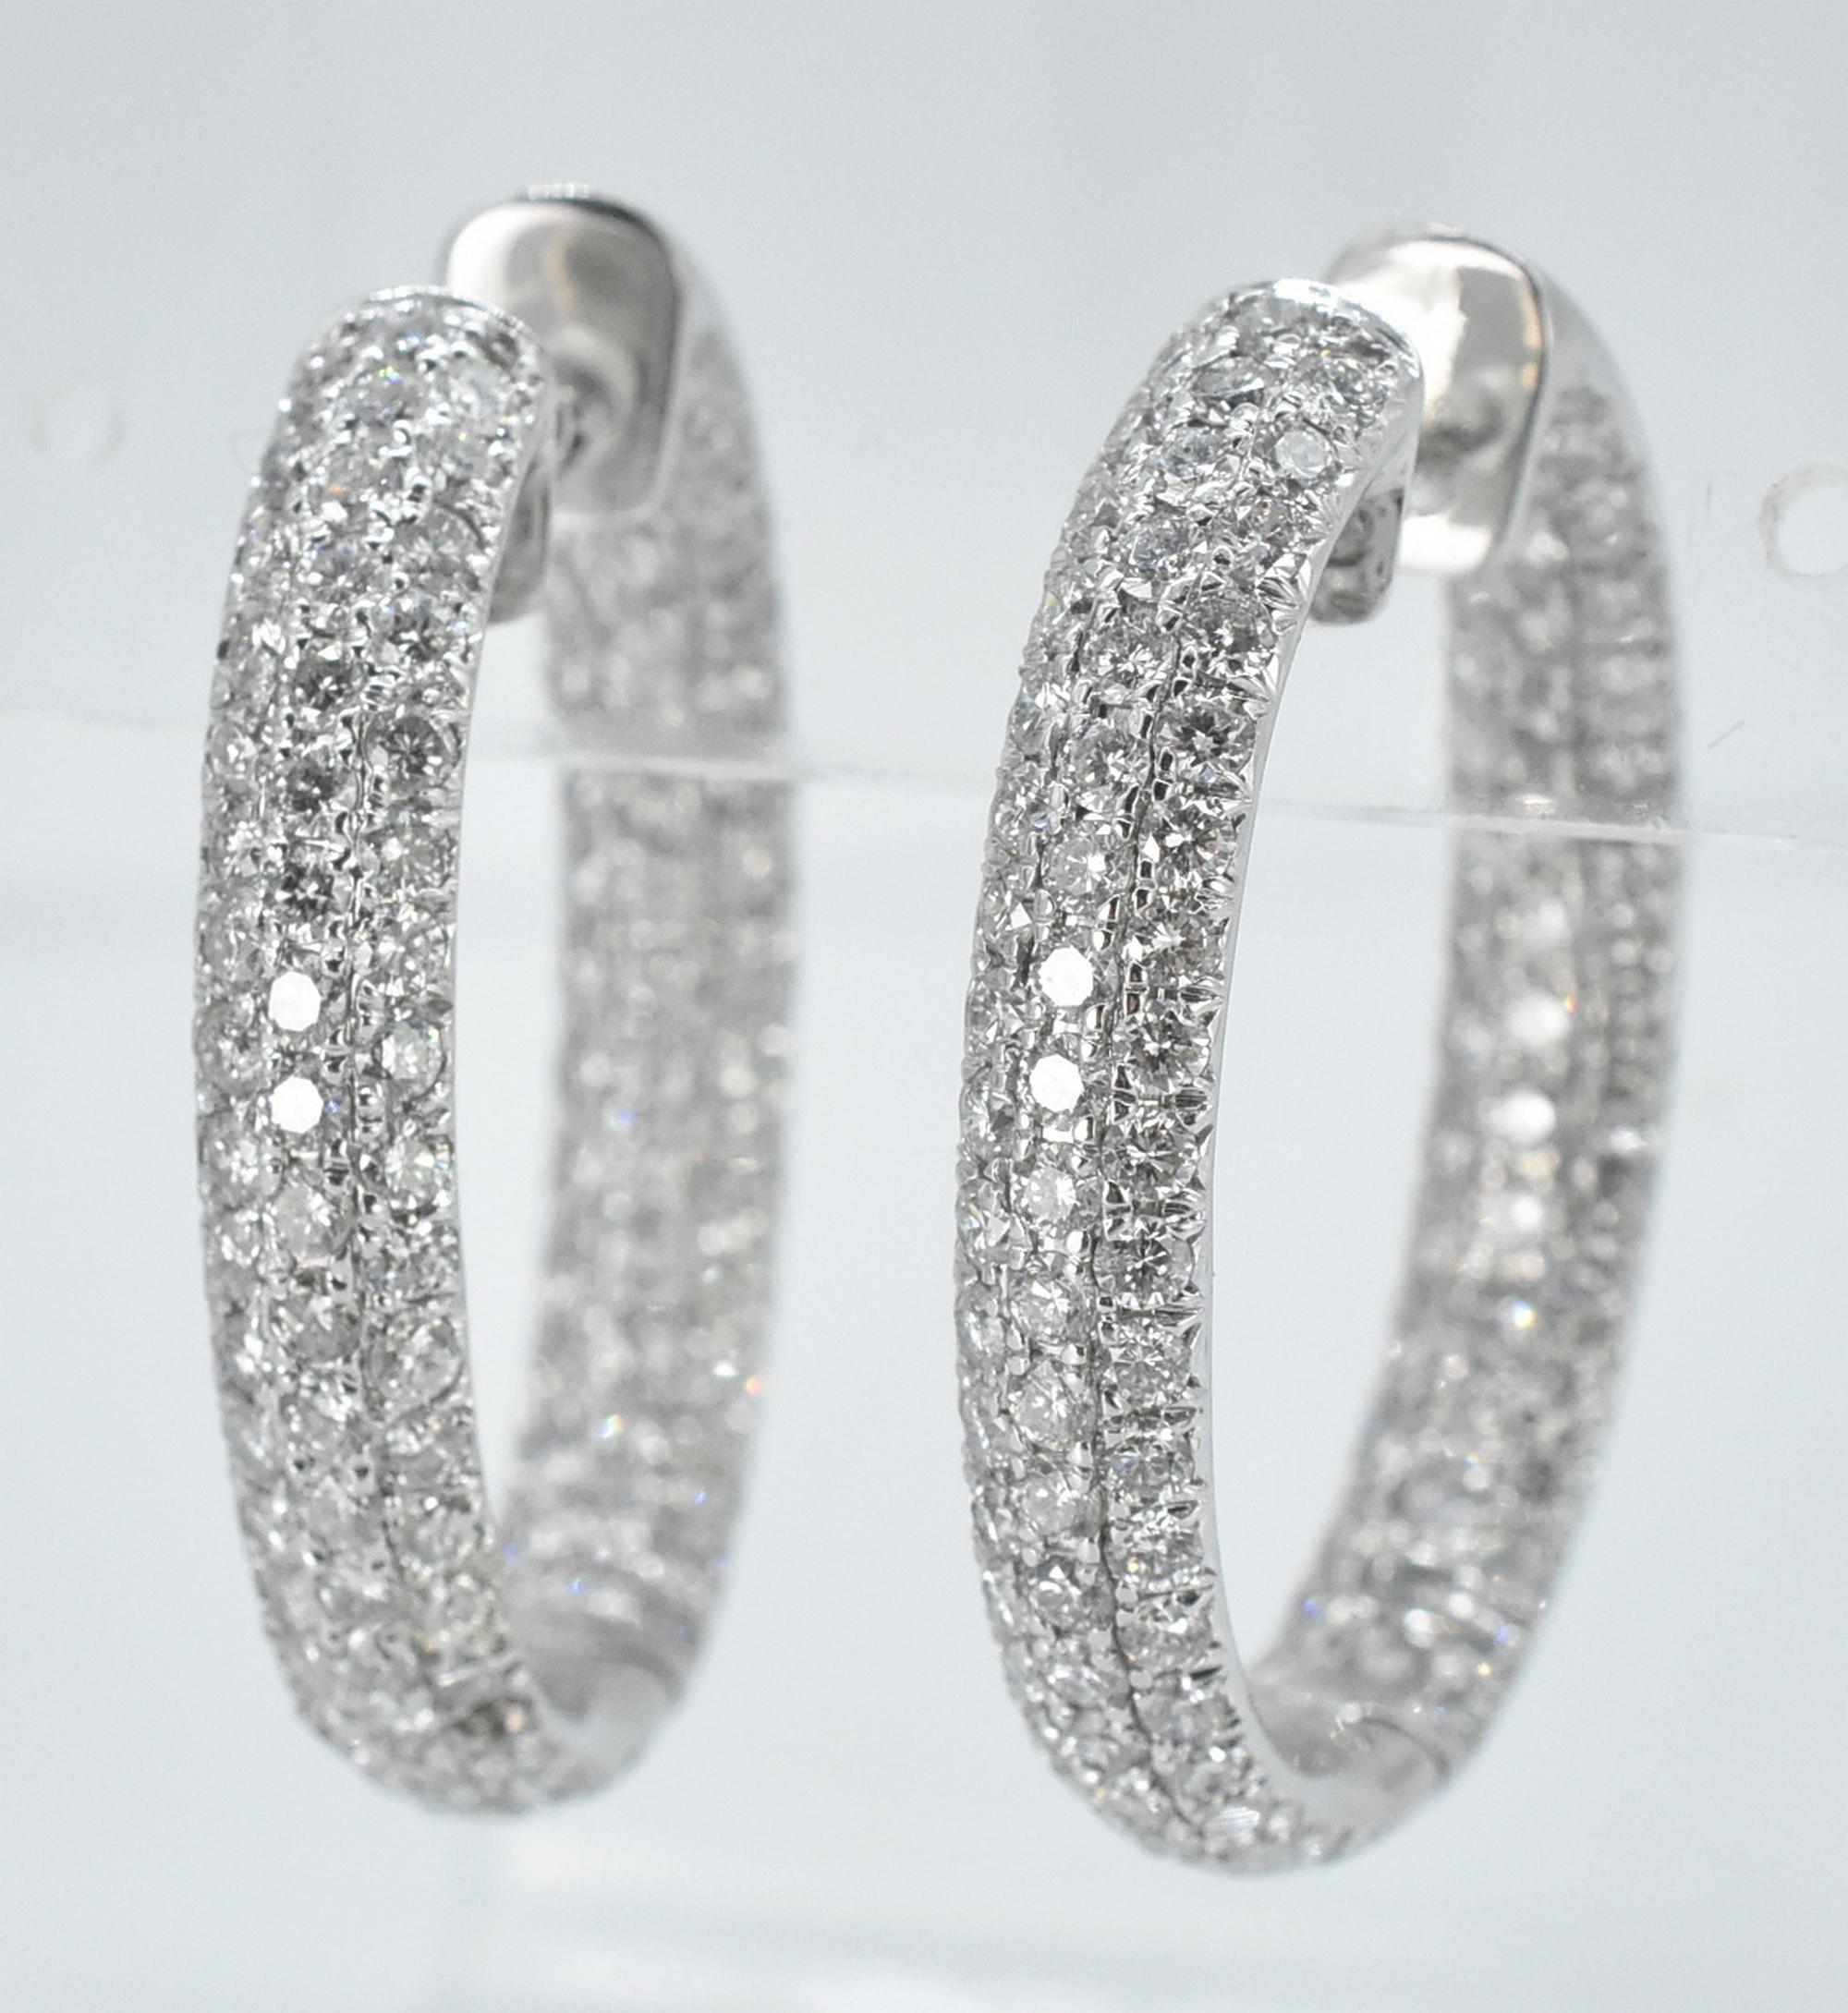 14k White Gold and 8 Cttw Diamond Pierced Earrings, Inside Out In Good Condition For Sale In Toledo, OH